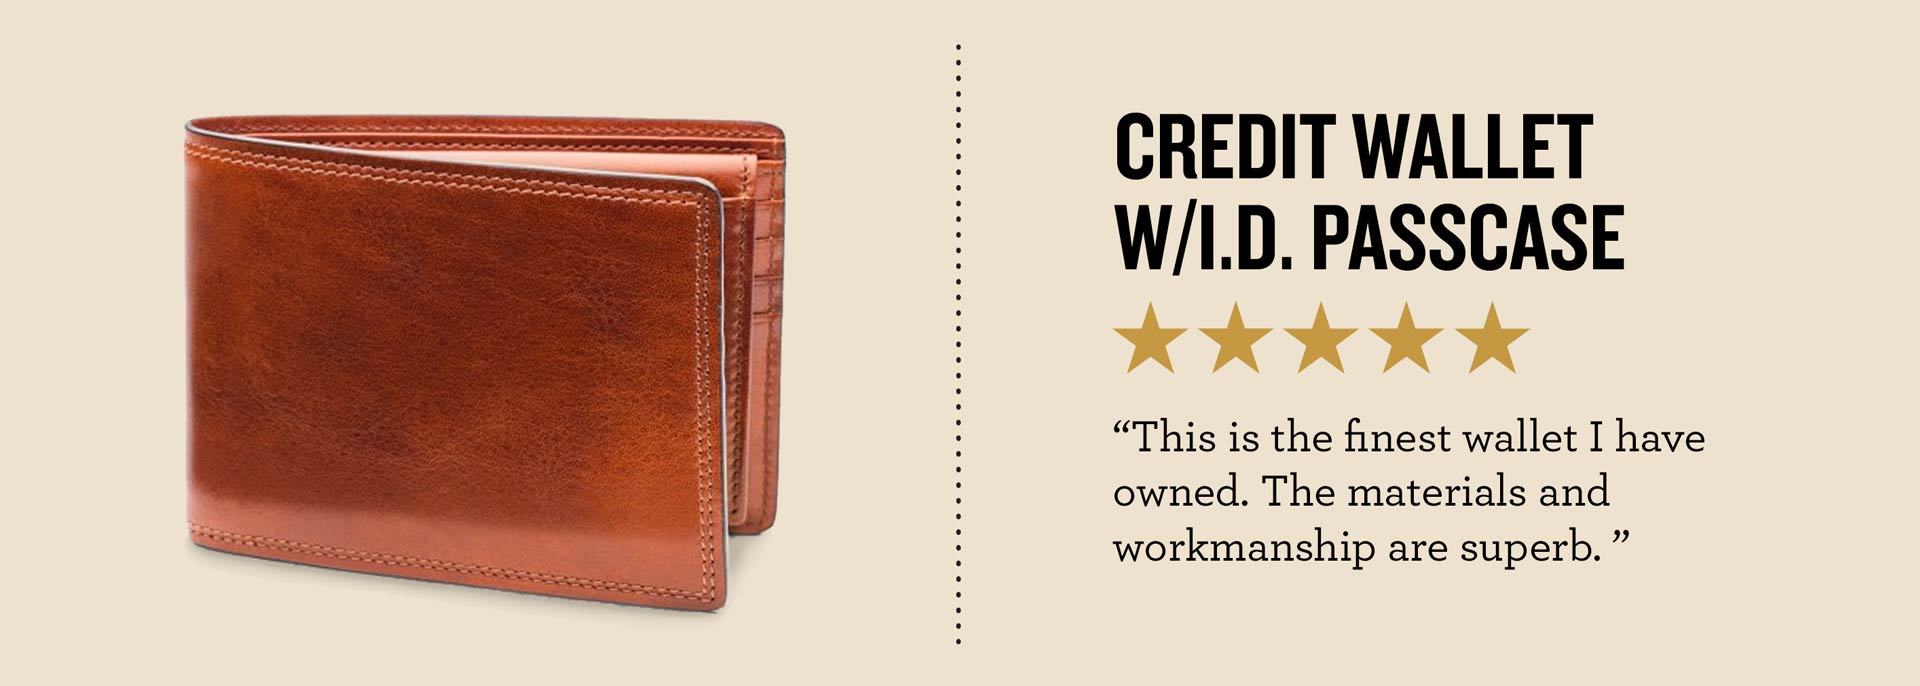 Bosca Men's Executive Wallet in Old Leather - India | Ubuy